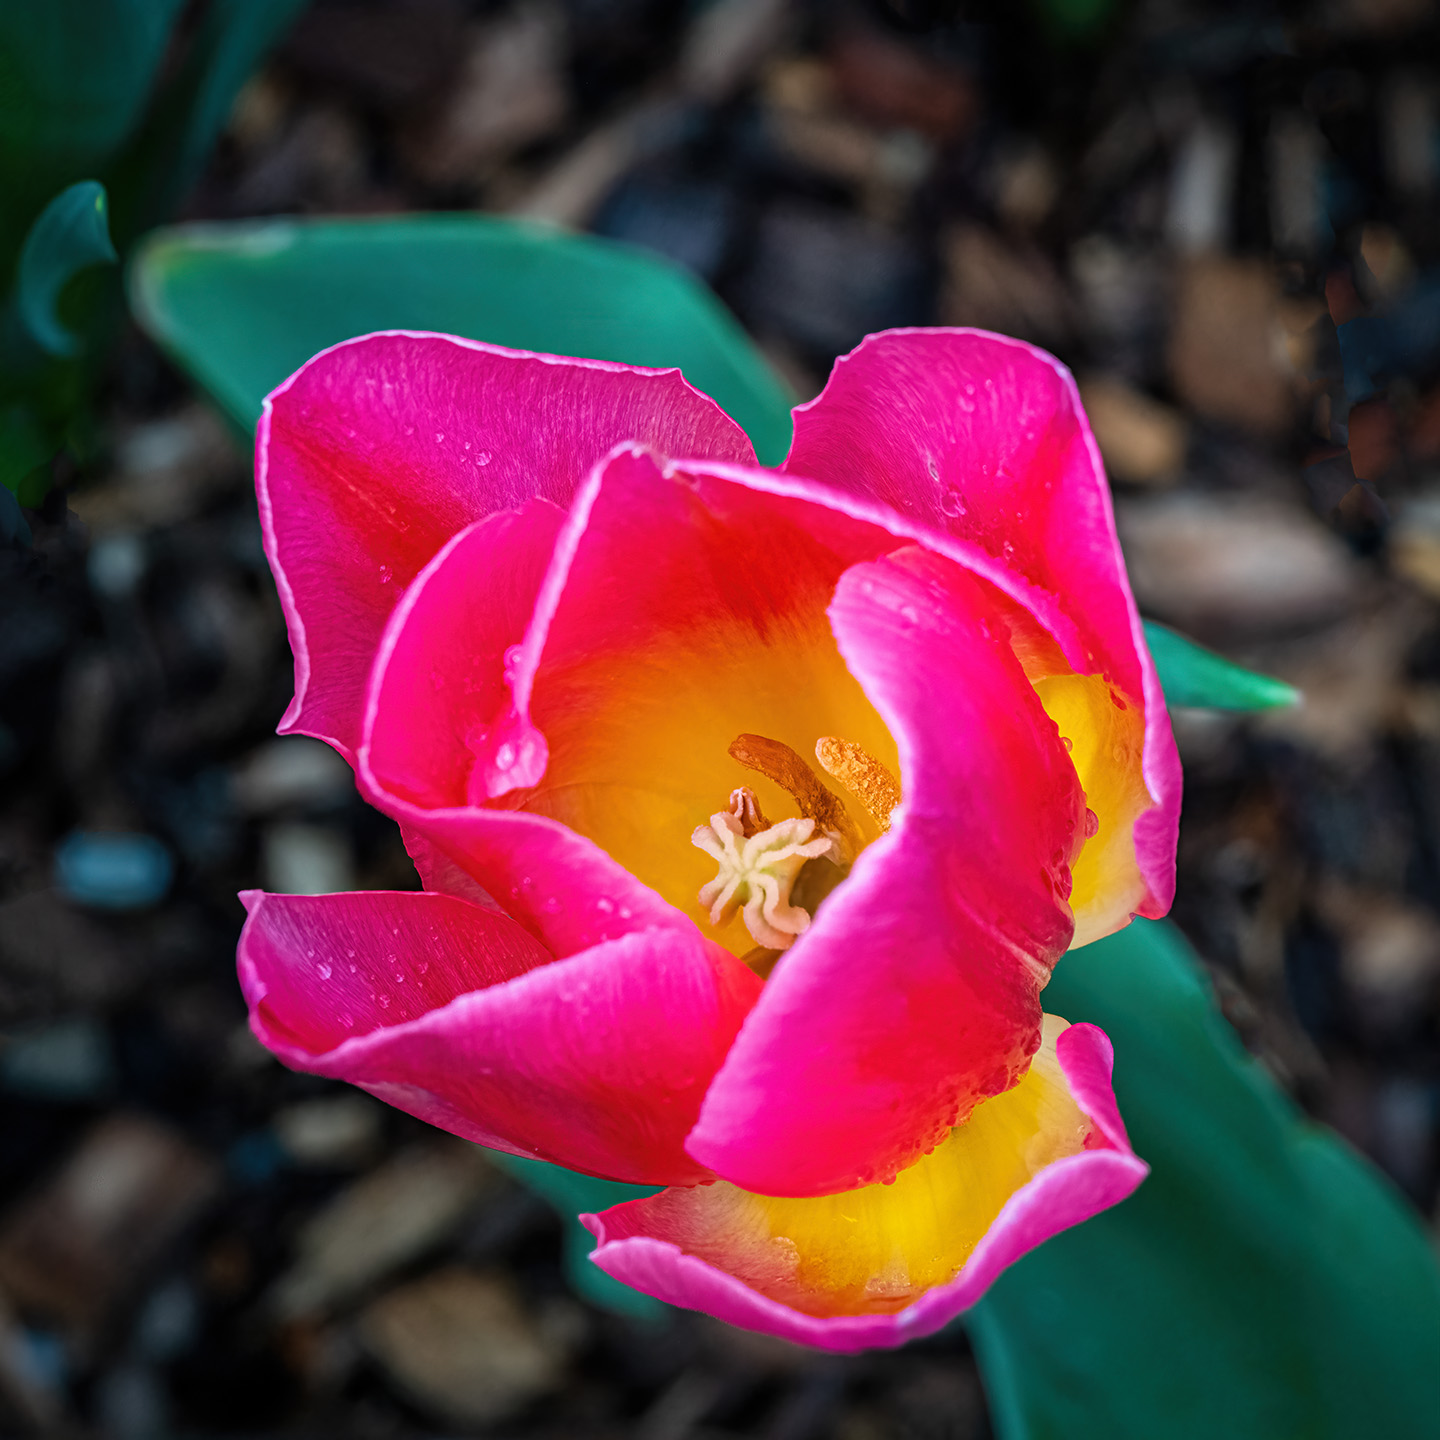 Solitary Tulip in Bloom by Rich Sears